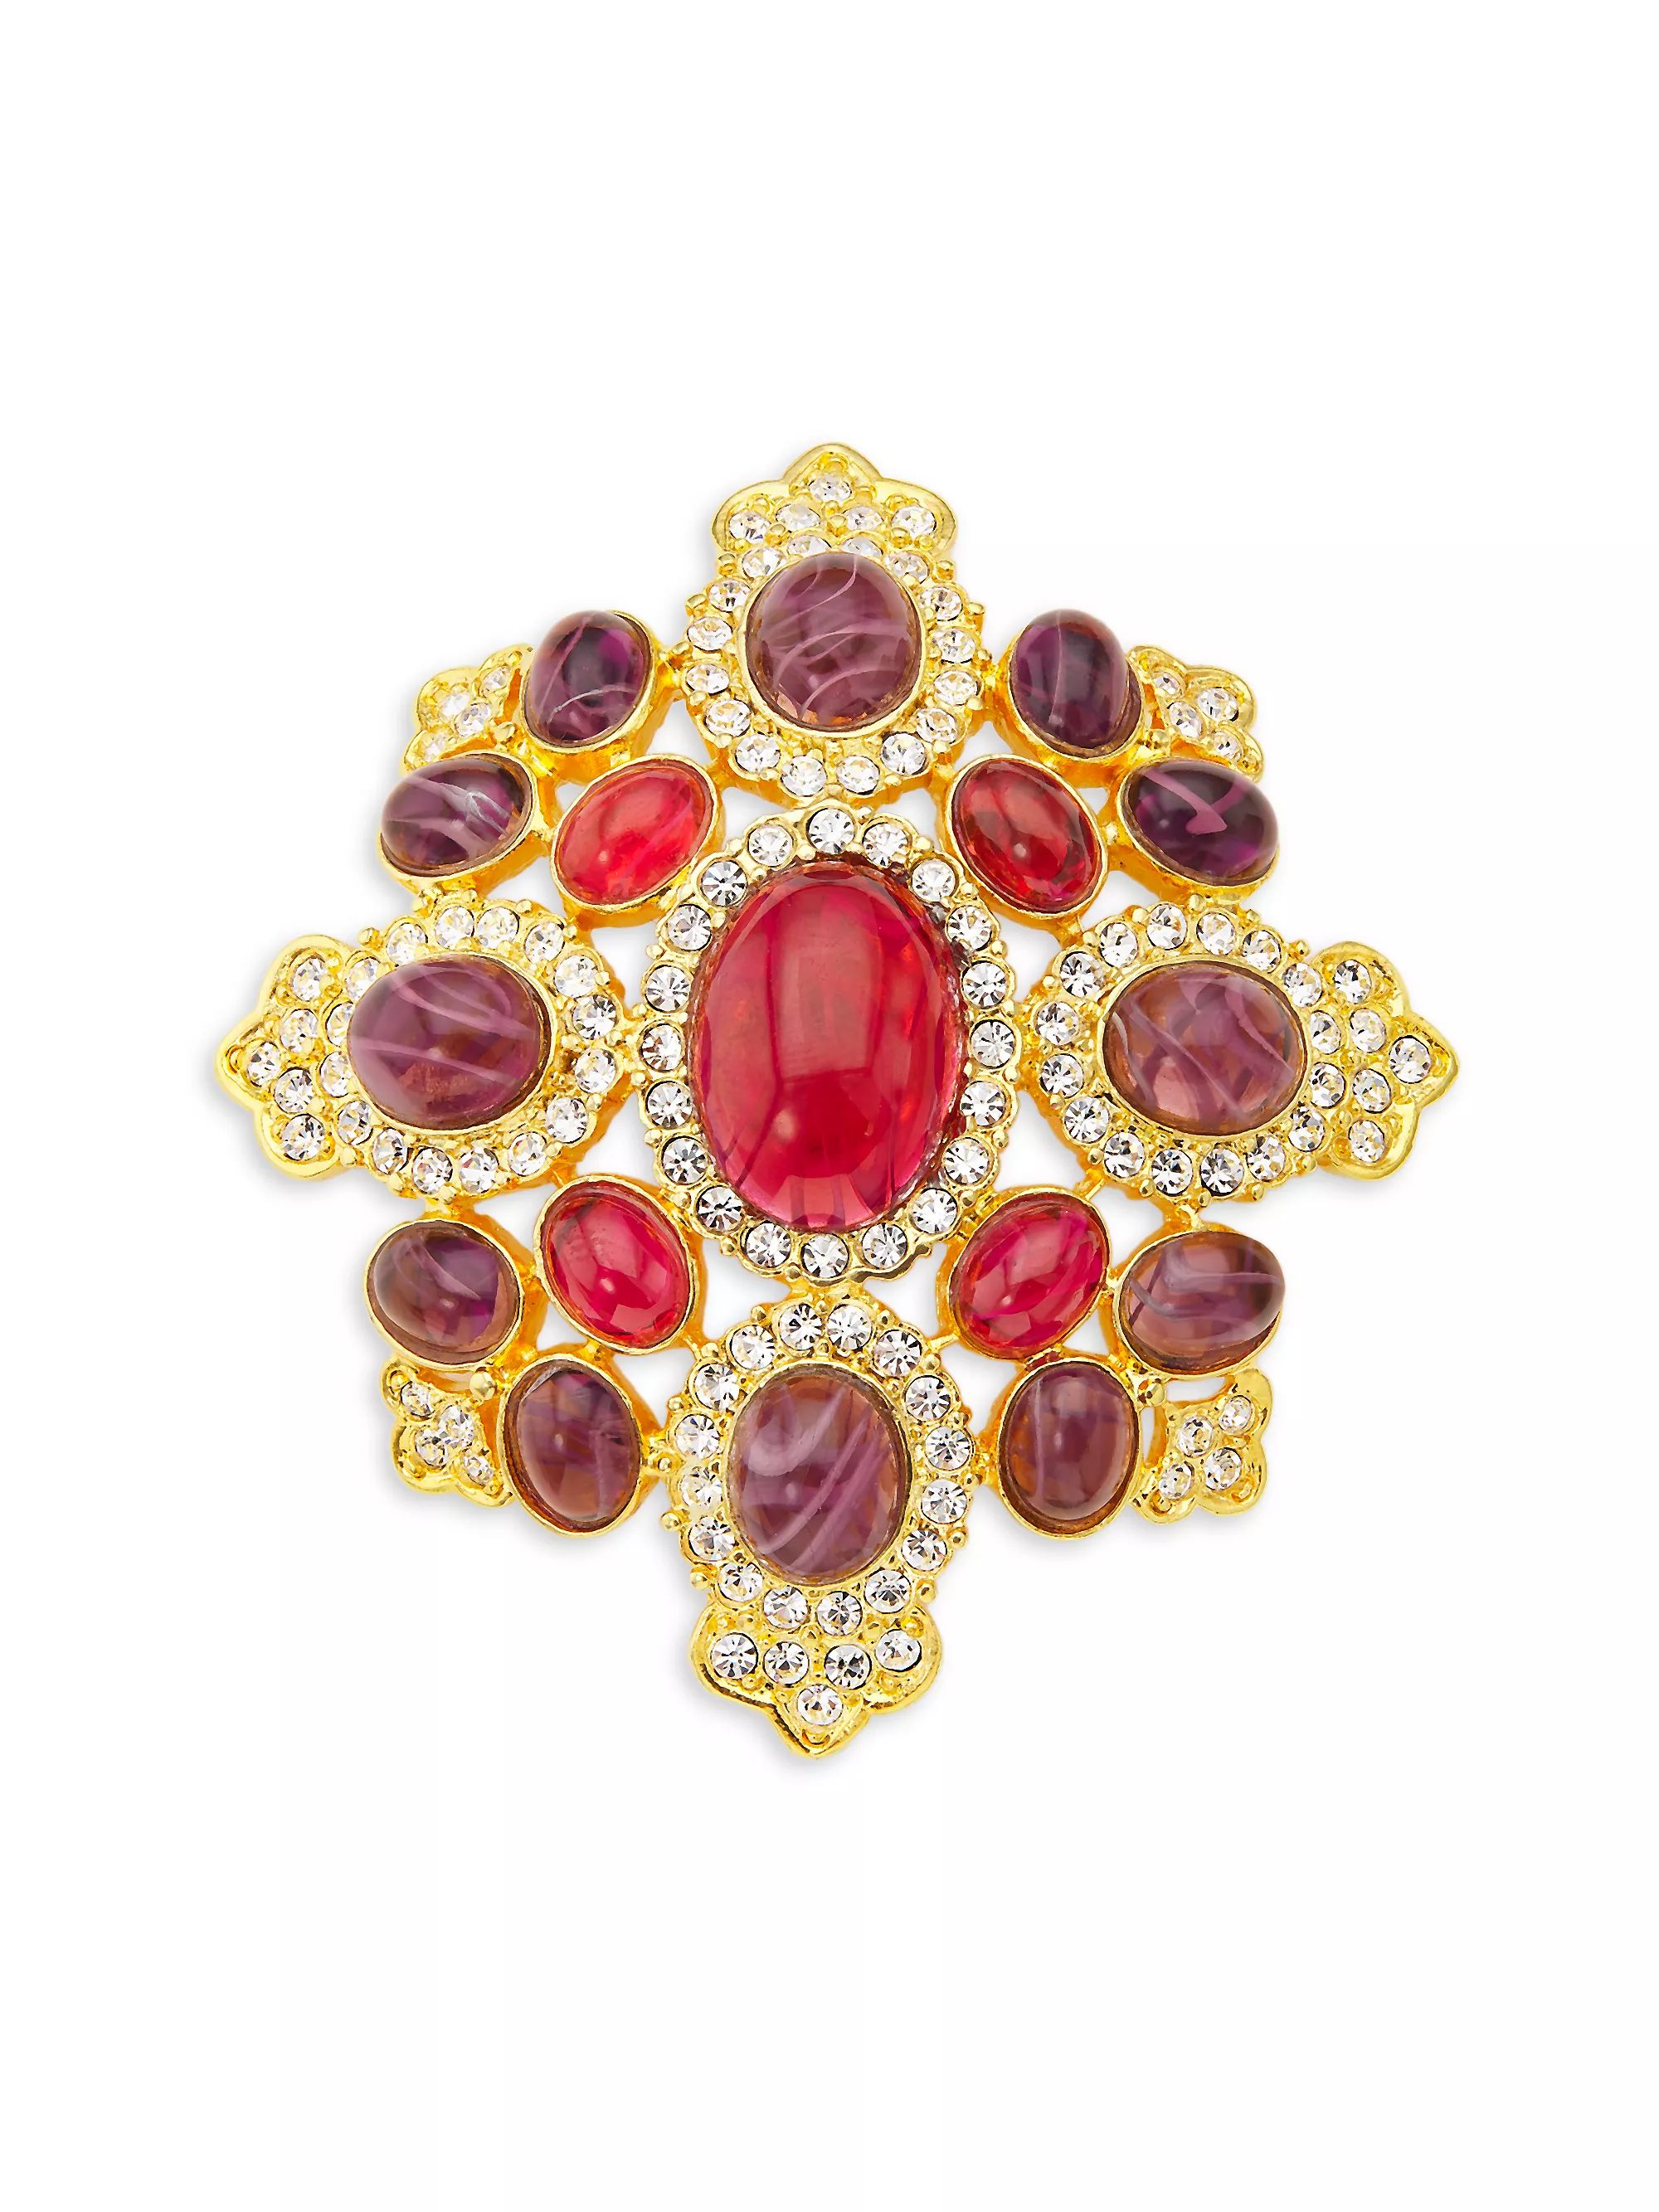 22K-Gold-Plated & Glass Brooch | Saks Fifth Avenue